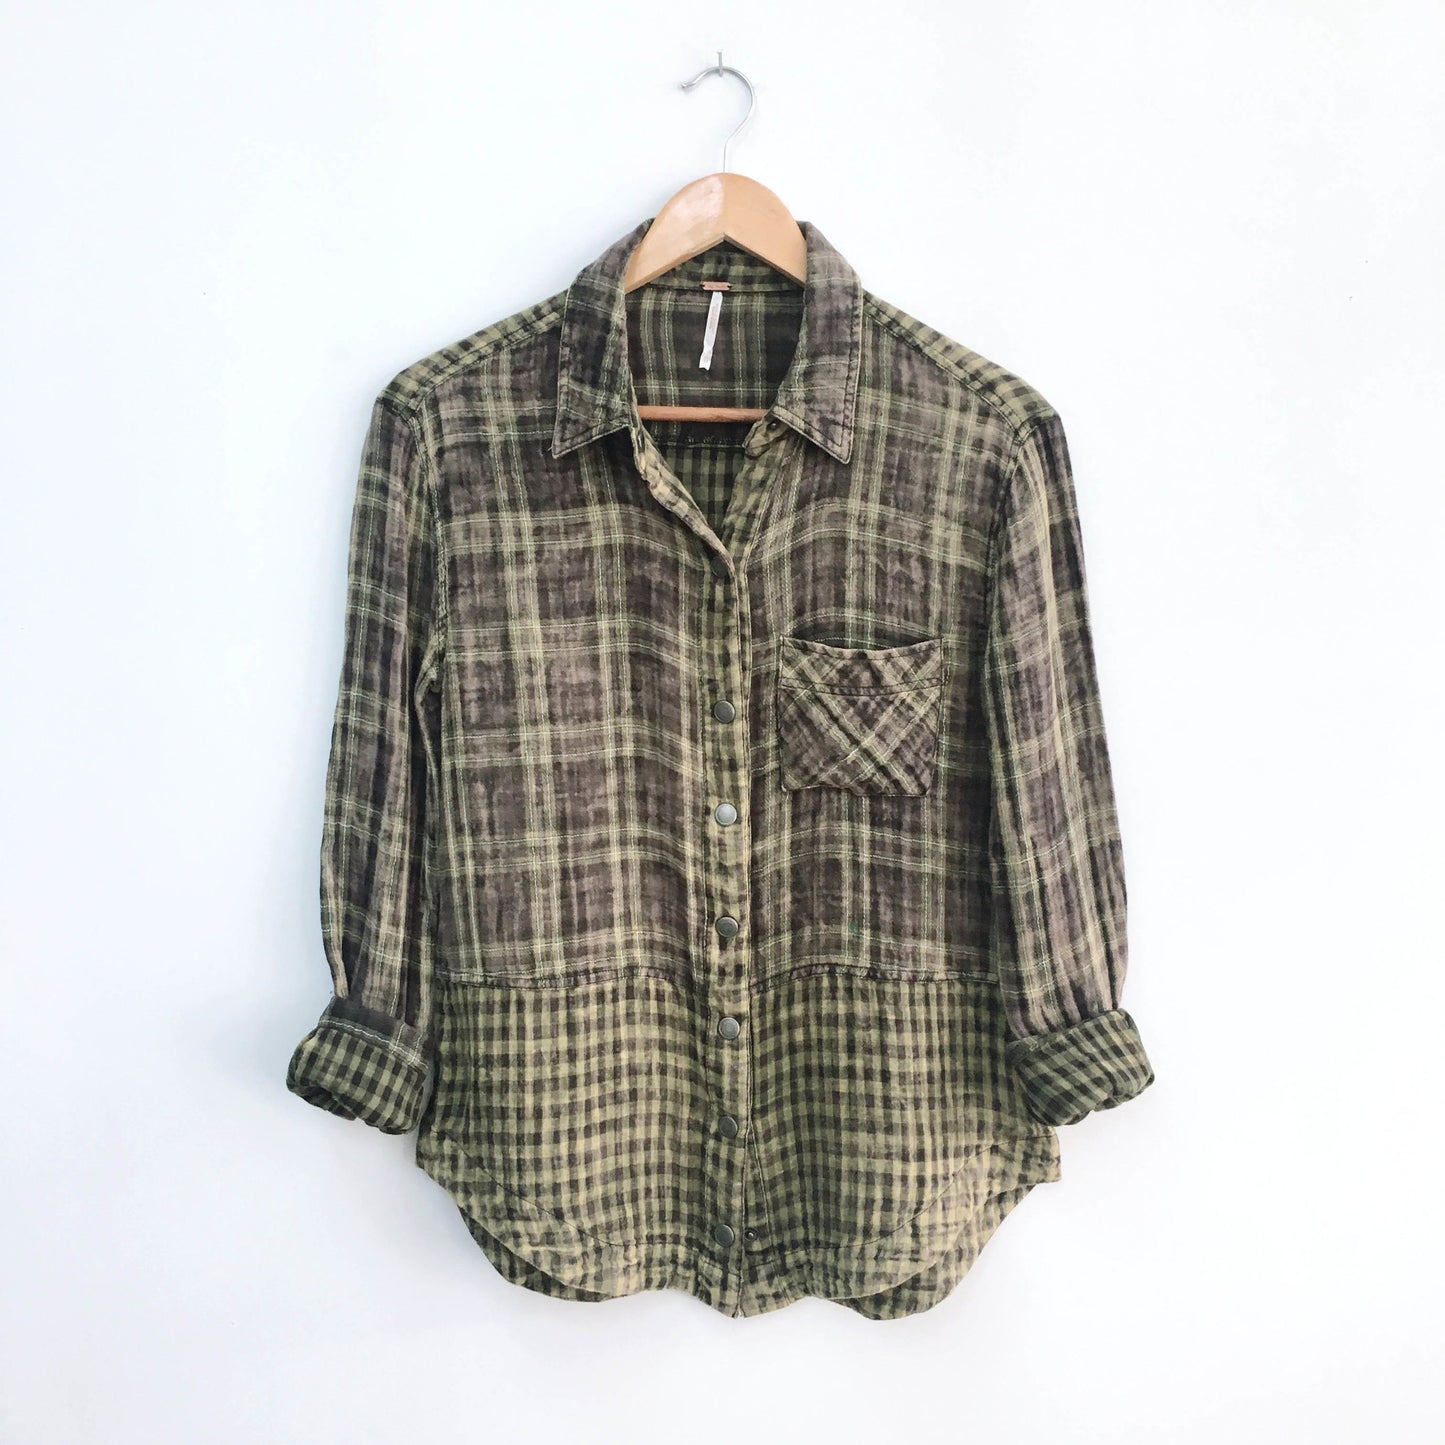 Free People Lyndsy Snap Button Shirt - size xs